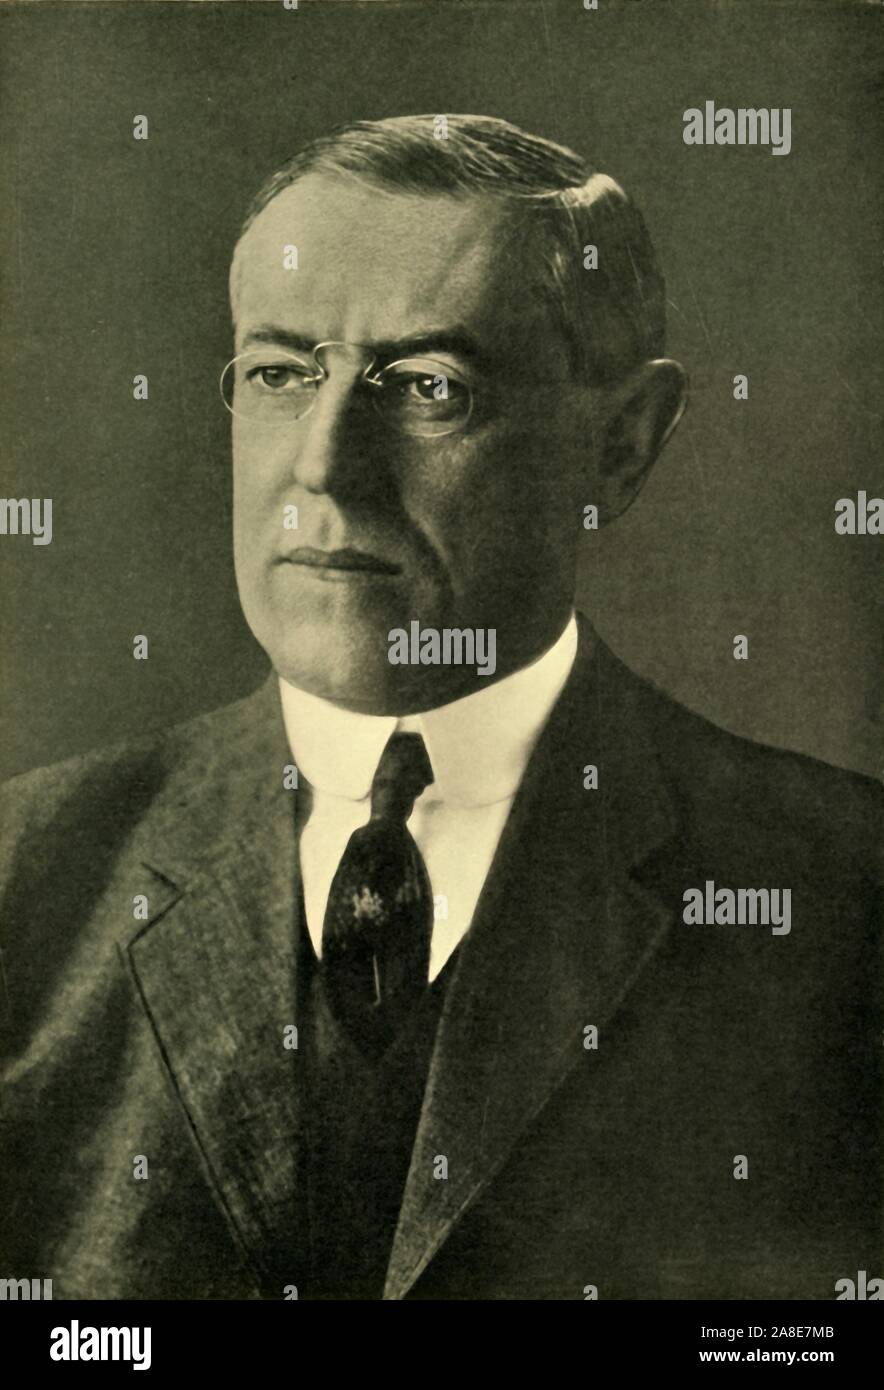 'Dr. Woodrow Wilson, President of the United States', 1912, (c1920). Portrait of Thomas Woodrow Wilson (1856-1924), President of the United States during World War I. From &quot;The Great World War: A History&quot;, Volume VI, edited by Frank A Mumby. [The Gresham Publishing Company Ltd, London, c1920] Stock Photo